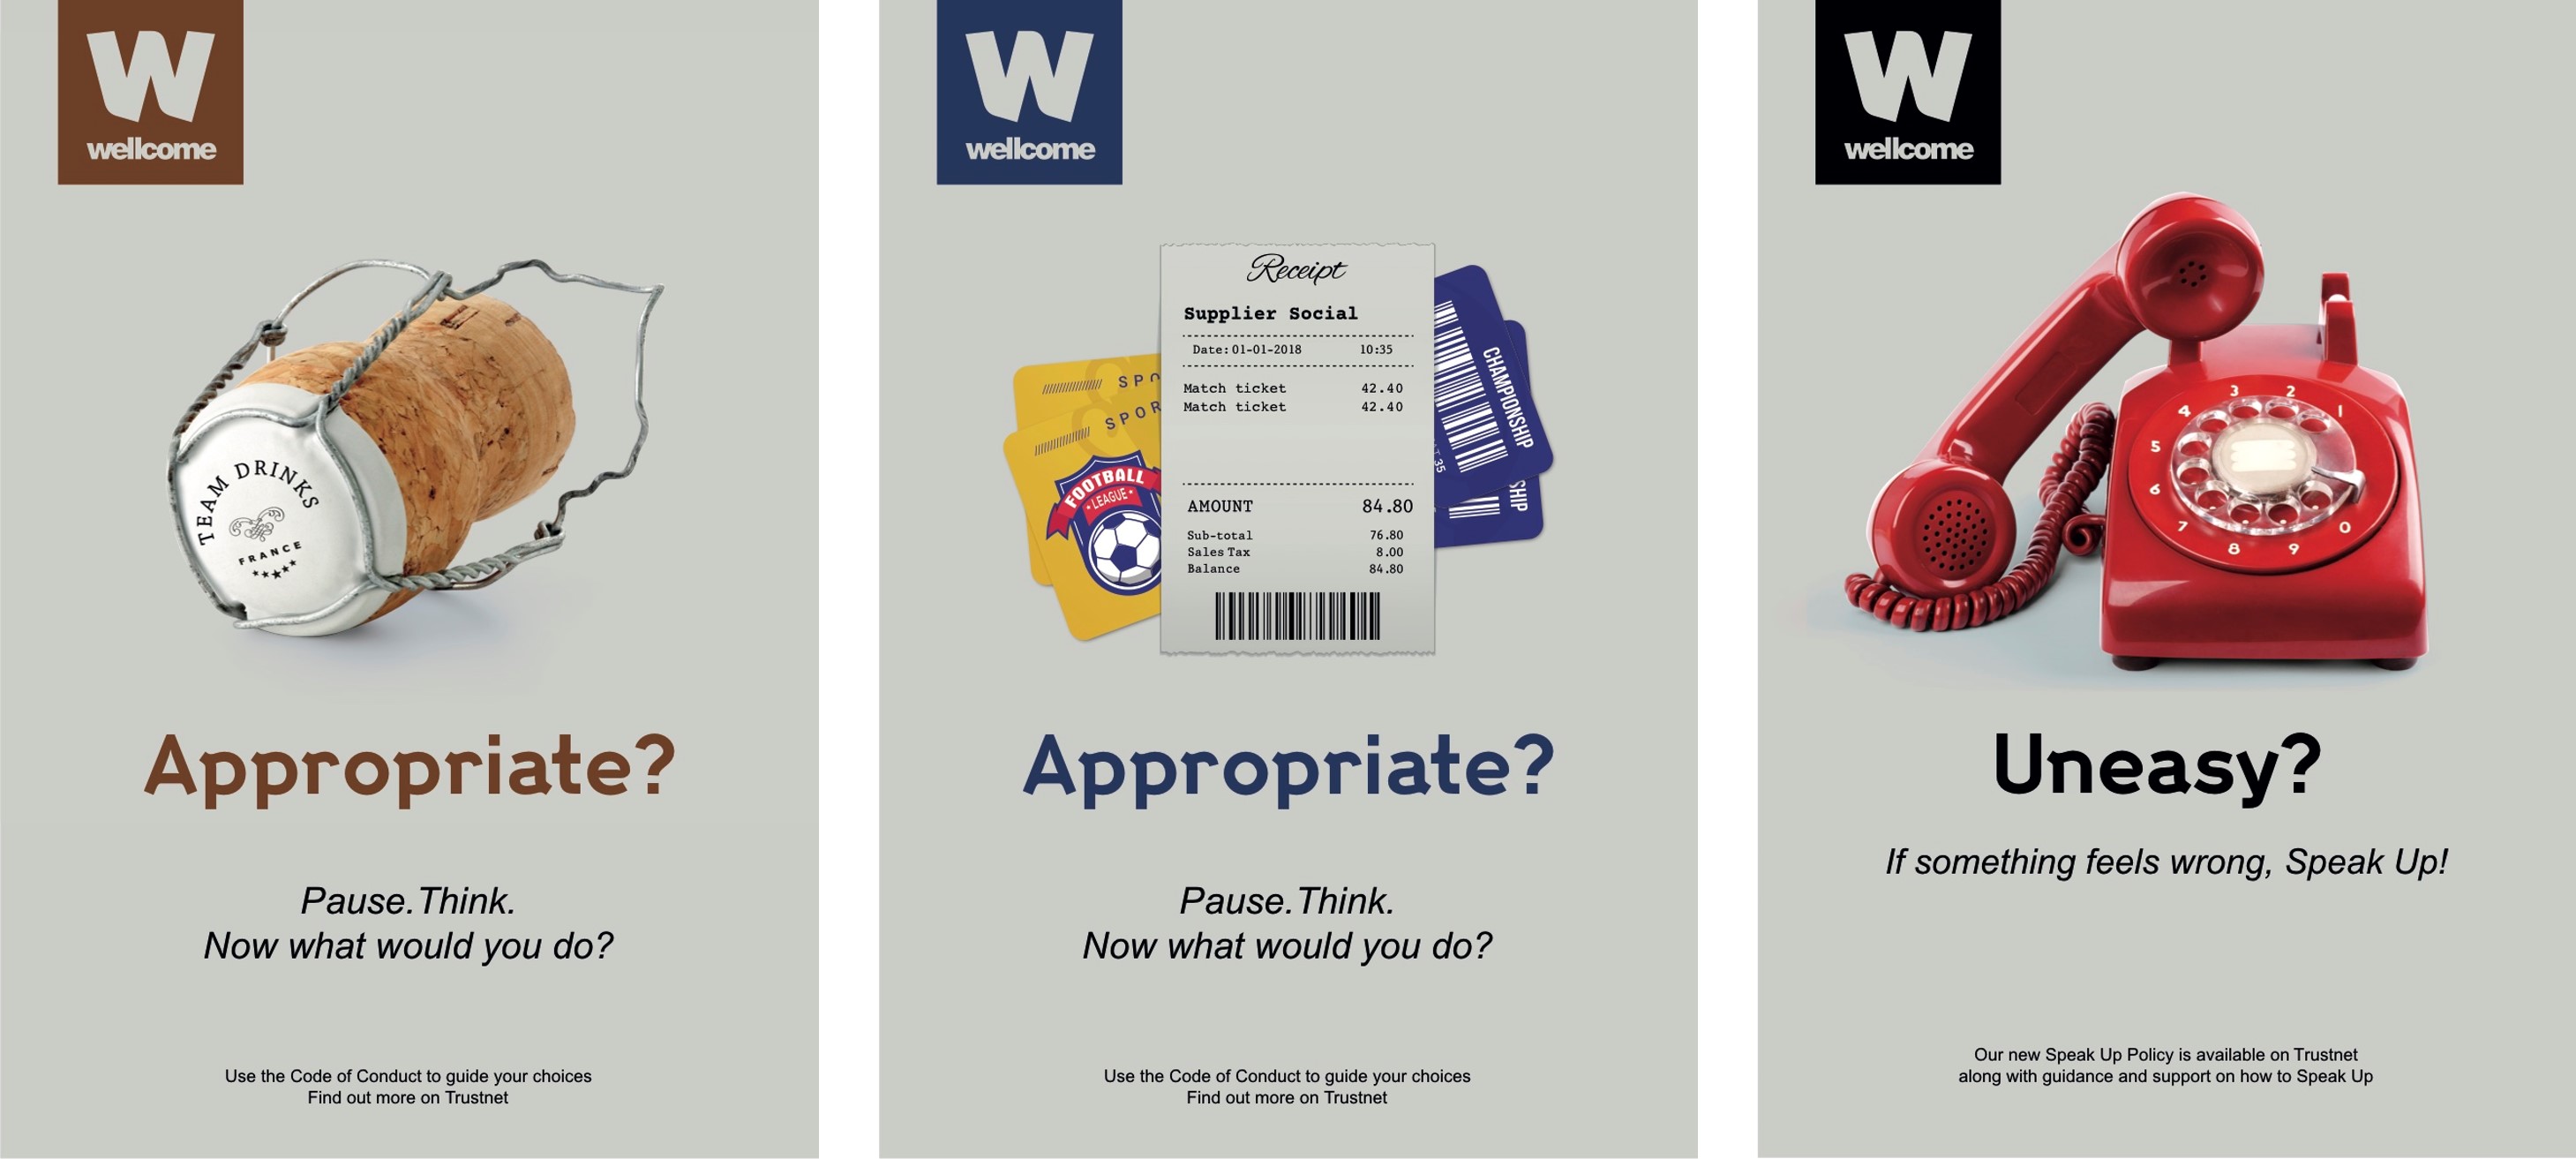 Posters asking employees to think whether a work scenario is appropriate. Champagne cork, football tickets, telephone..